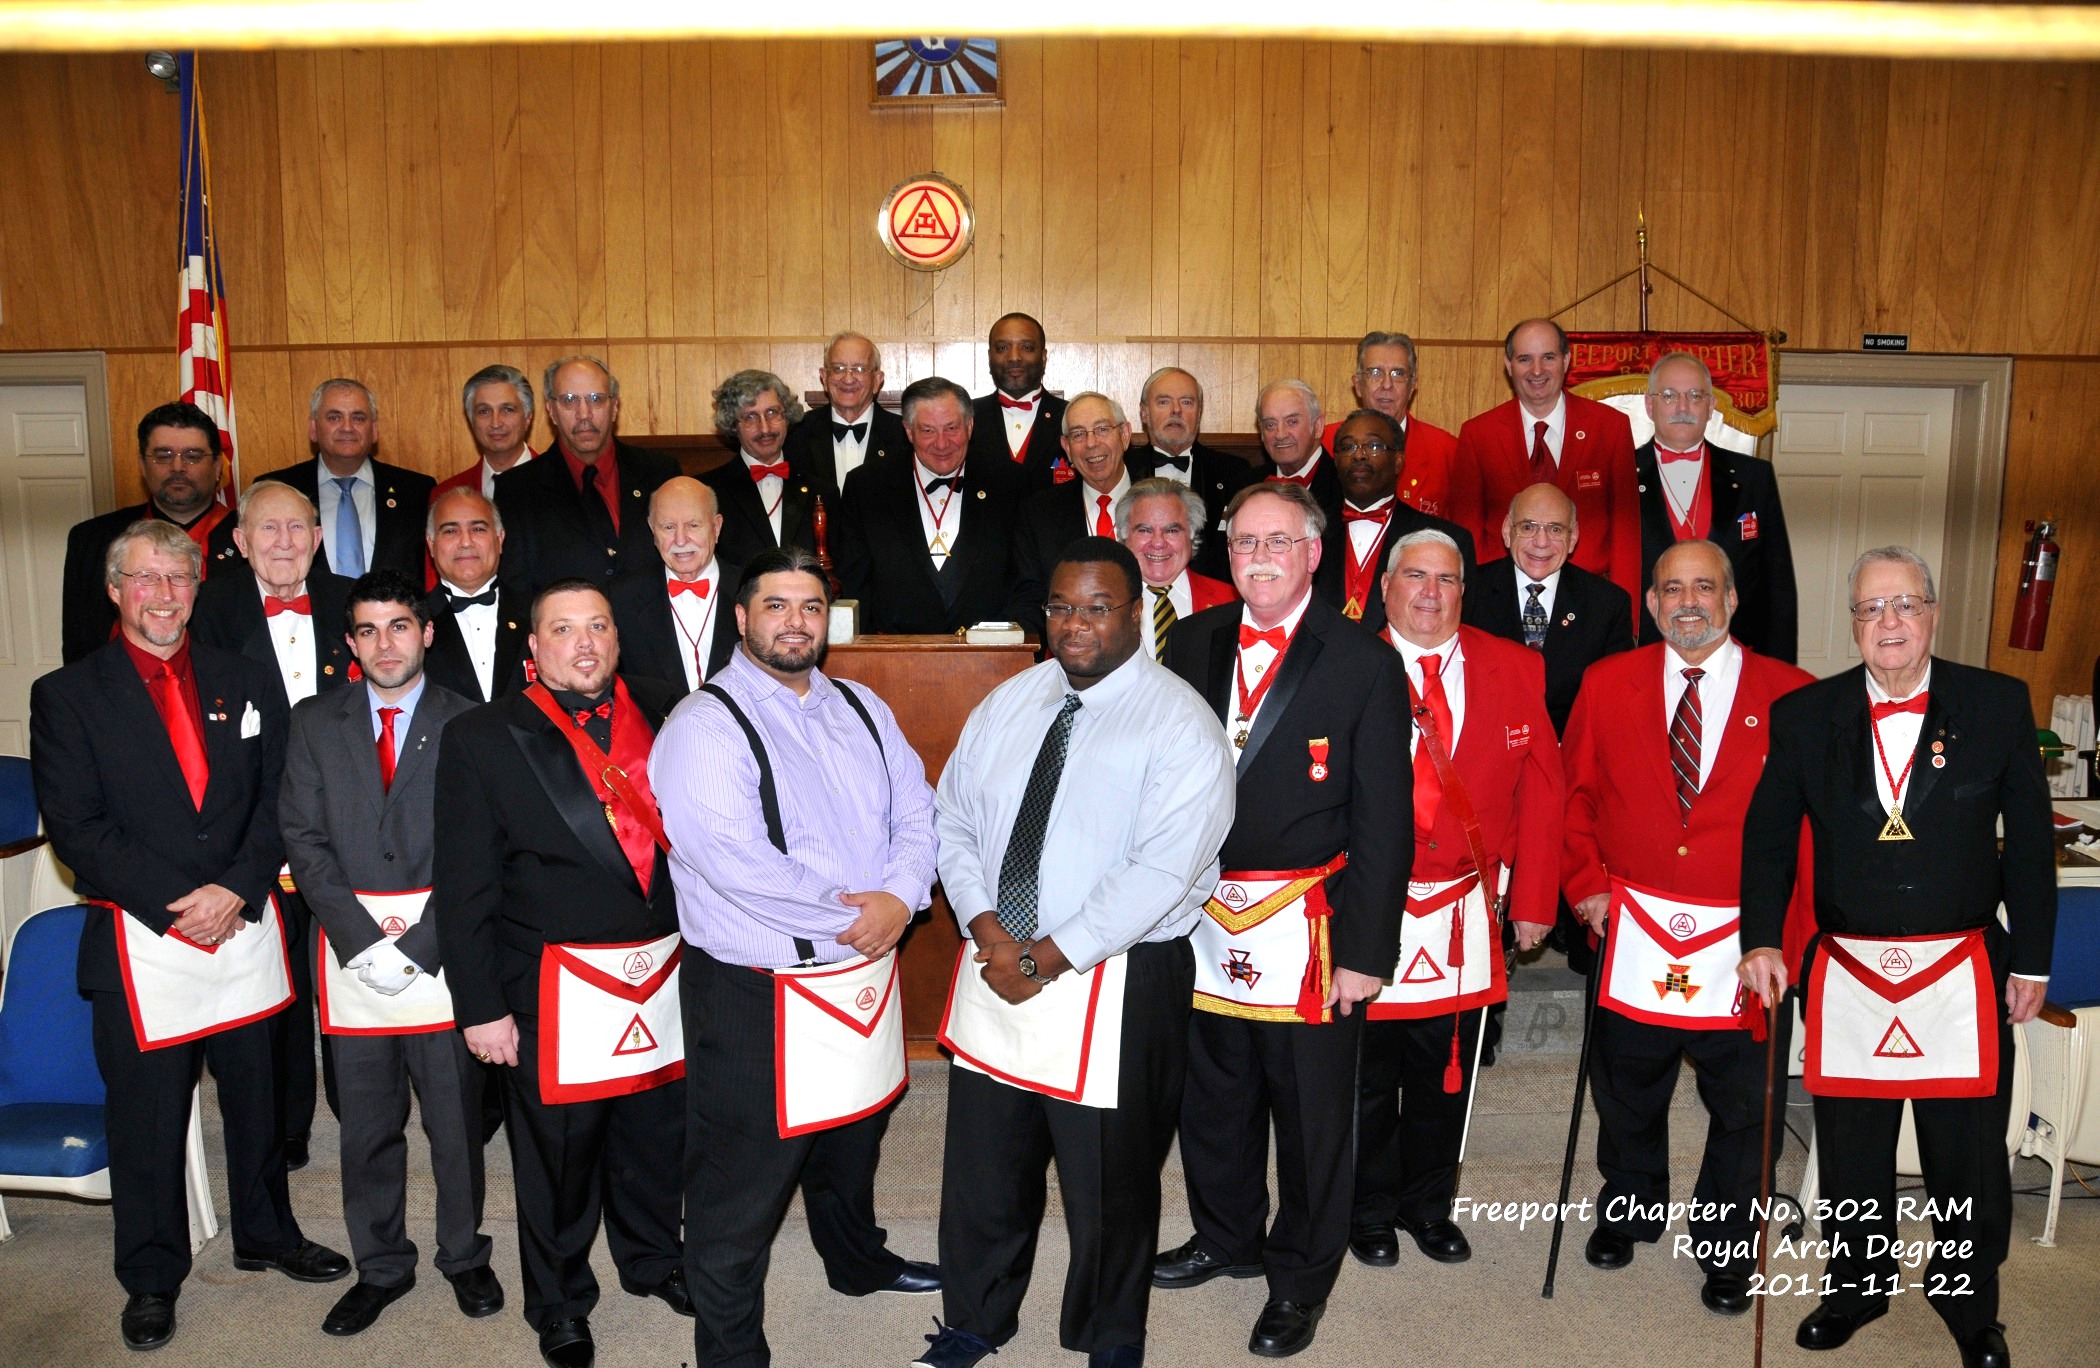 Freeport Chapter 302 Royal Arch Degree